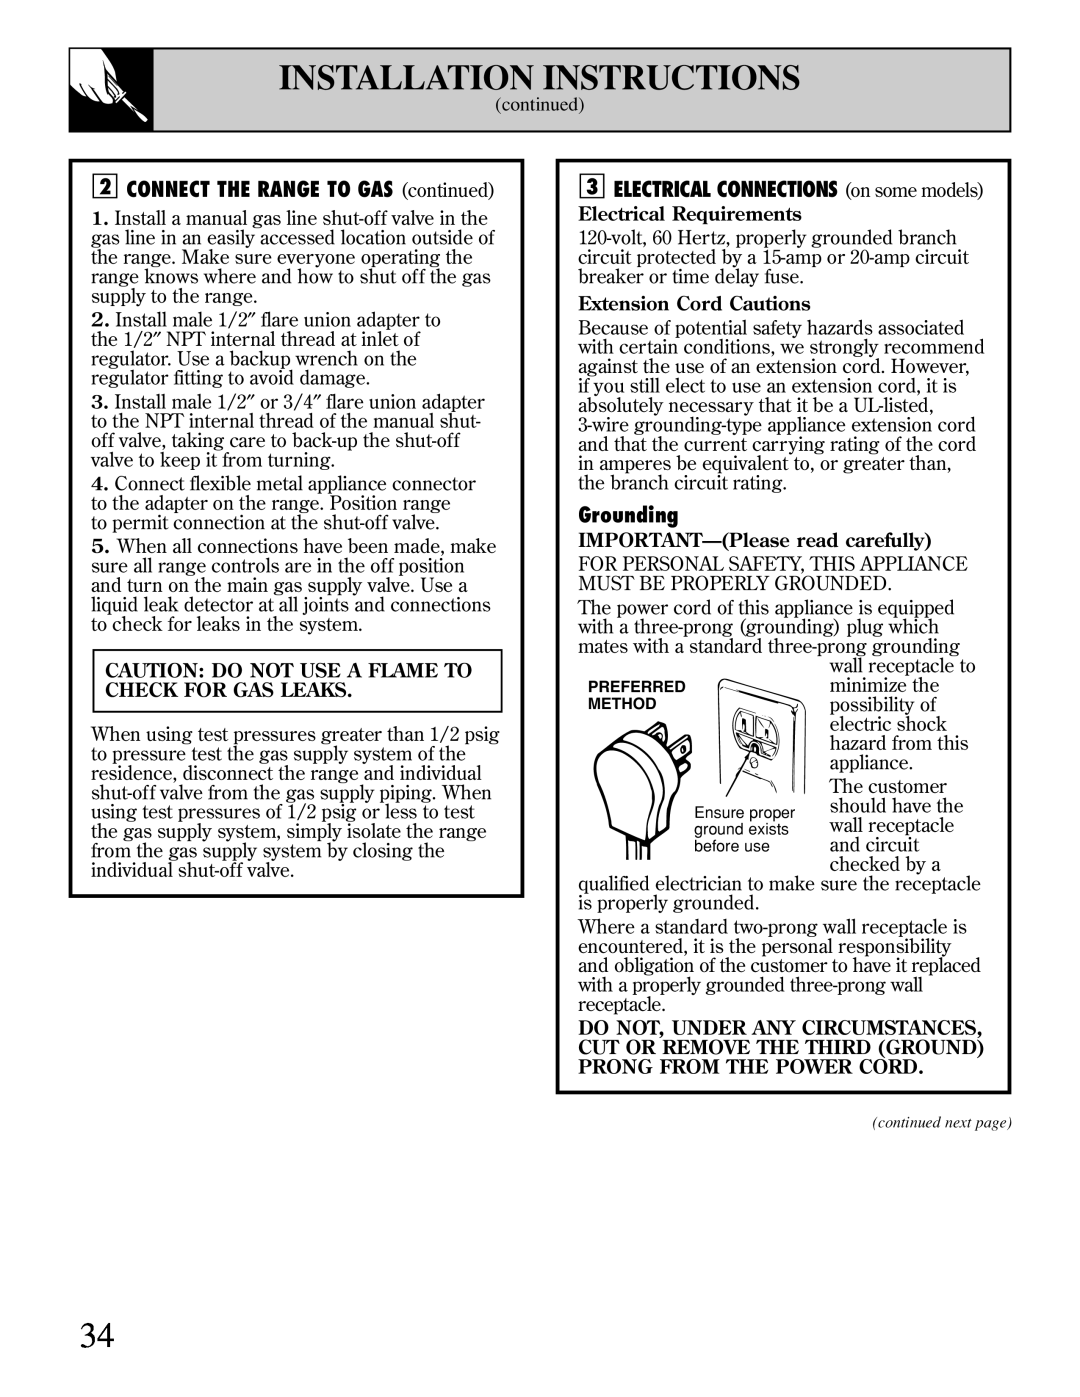 GE XL44 Installation Instructions, CONNECT THE RANGE TO GAS continued, ELECTRICAL CONNECTIONS on some models, Grounding 